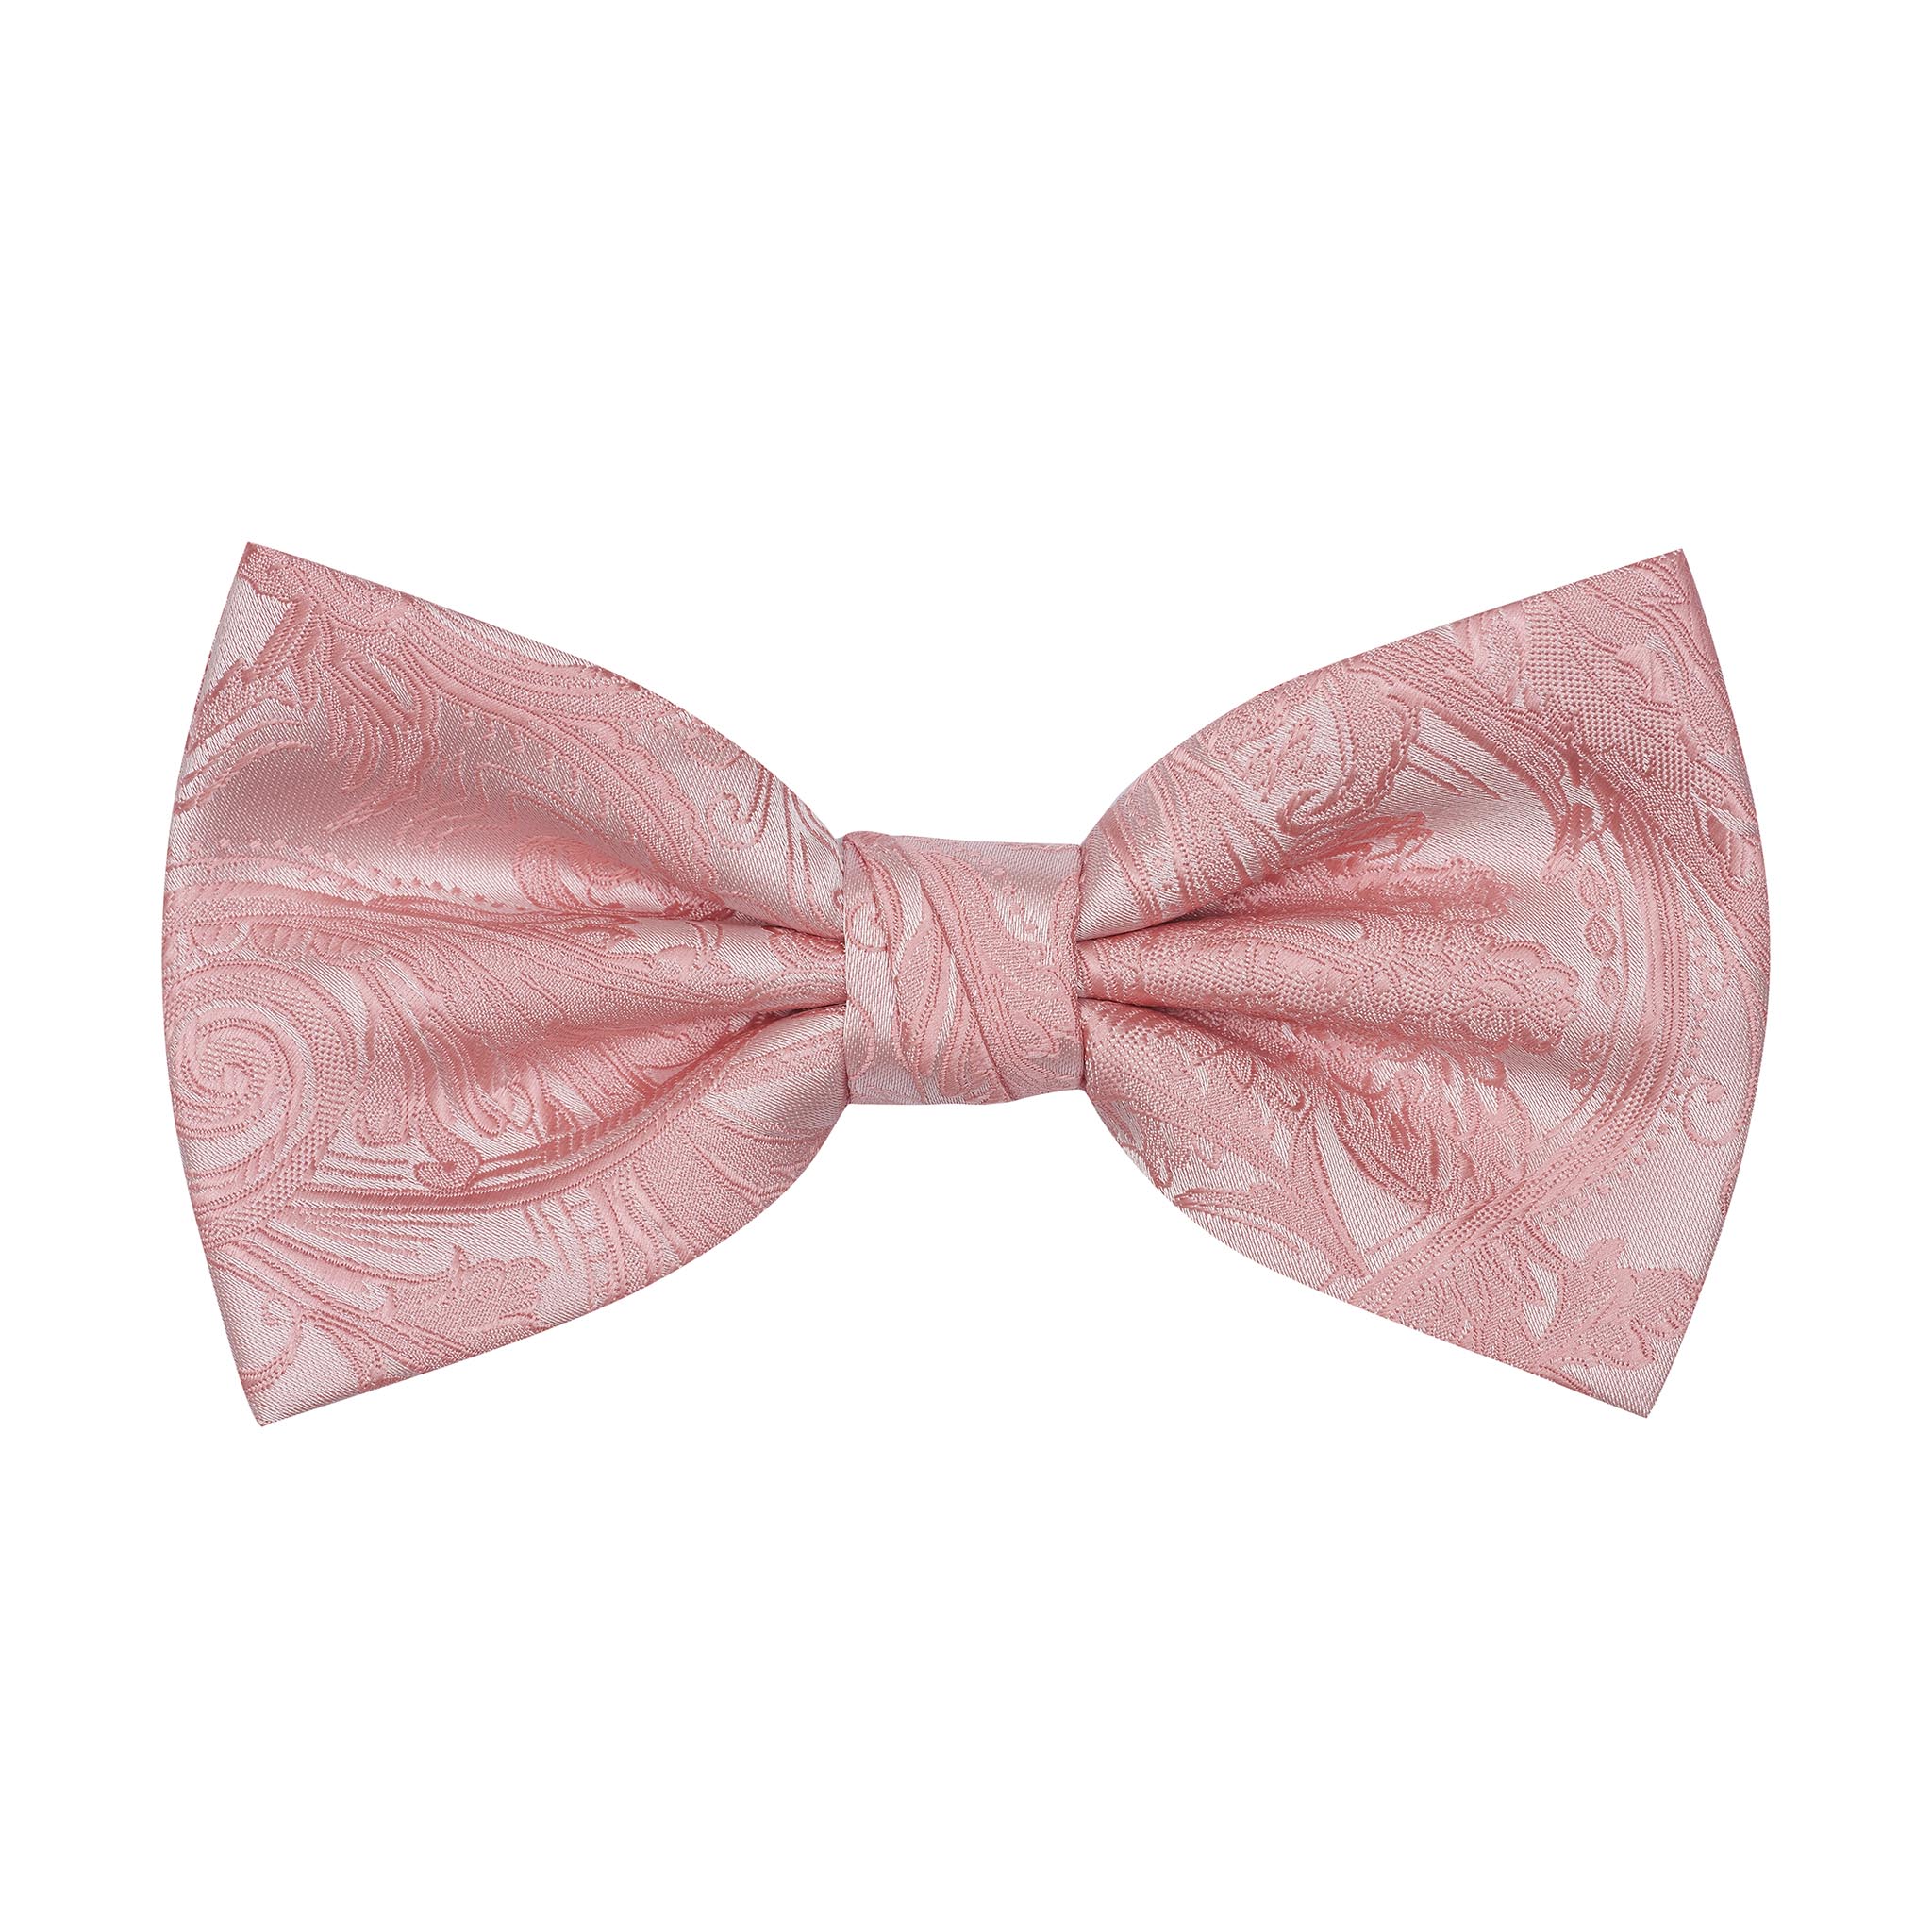 Tapestry Floral-Print Bowtie